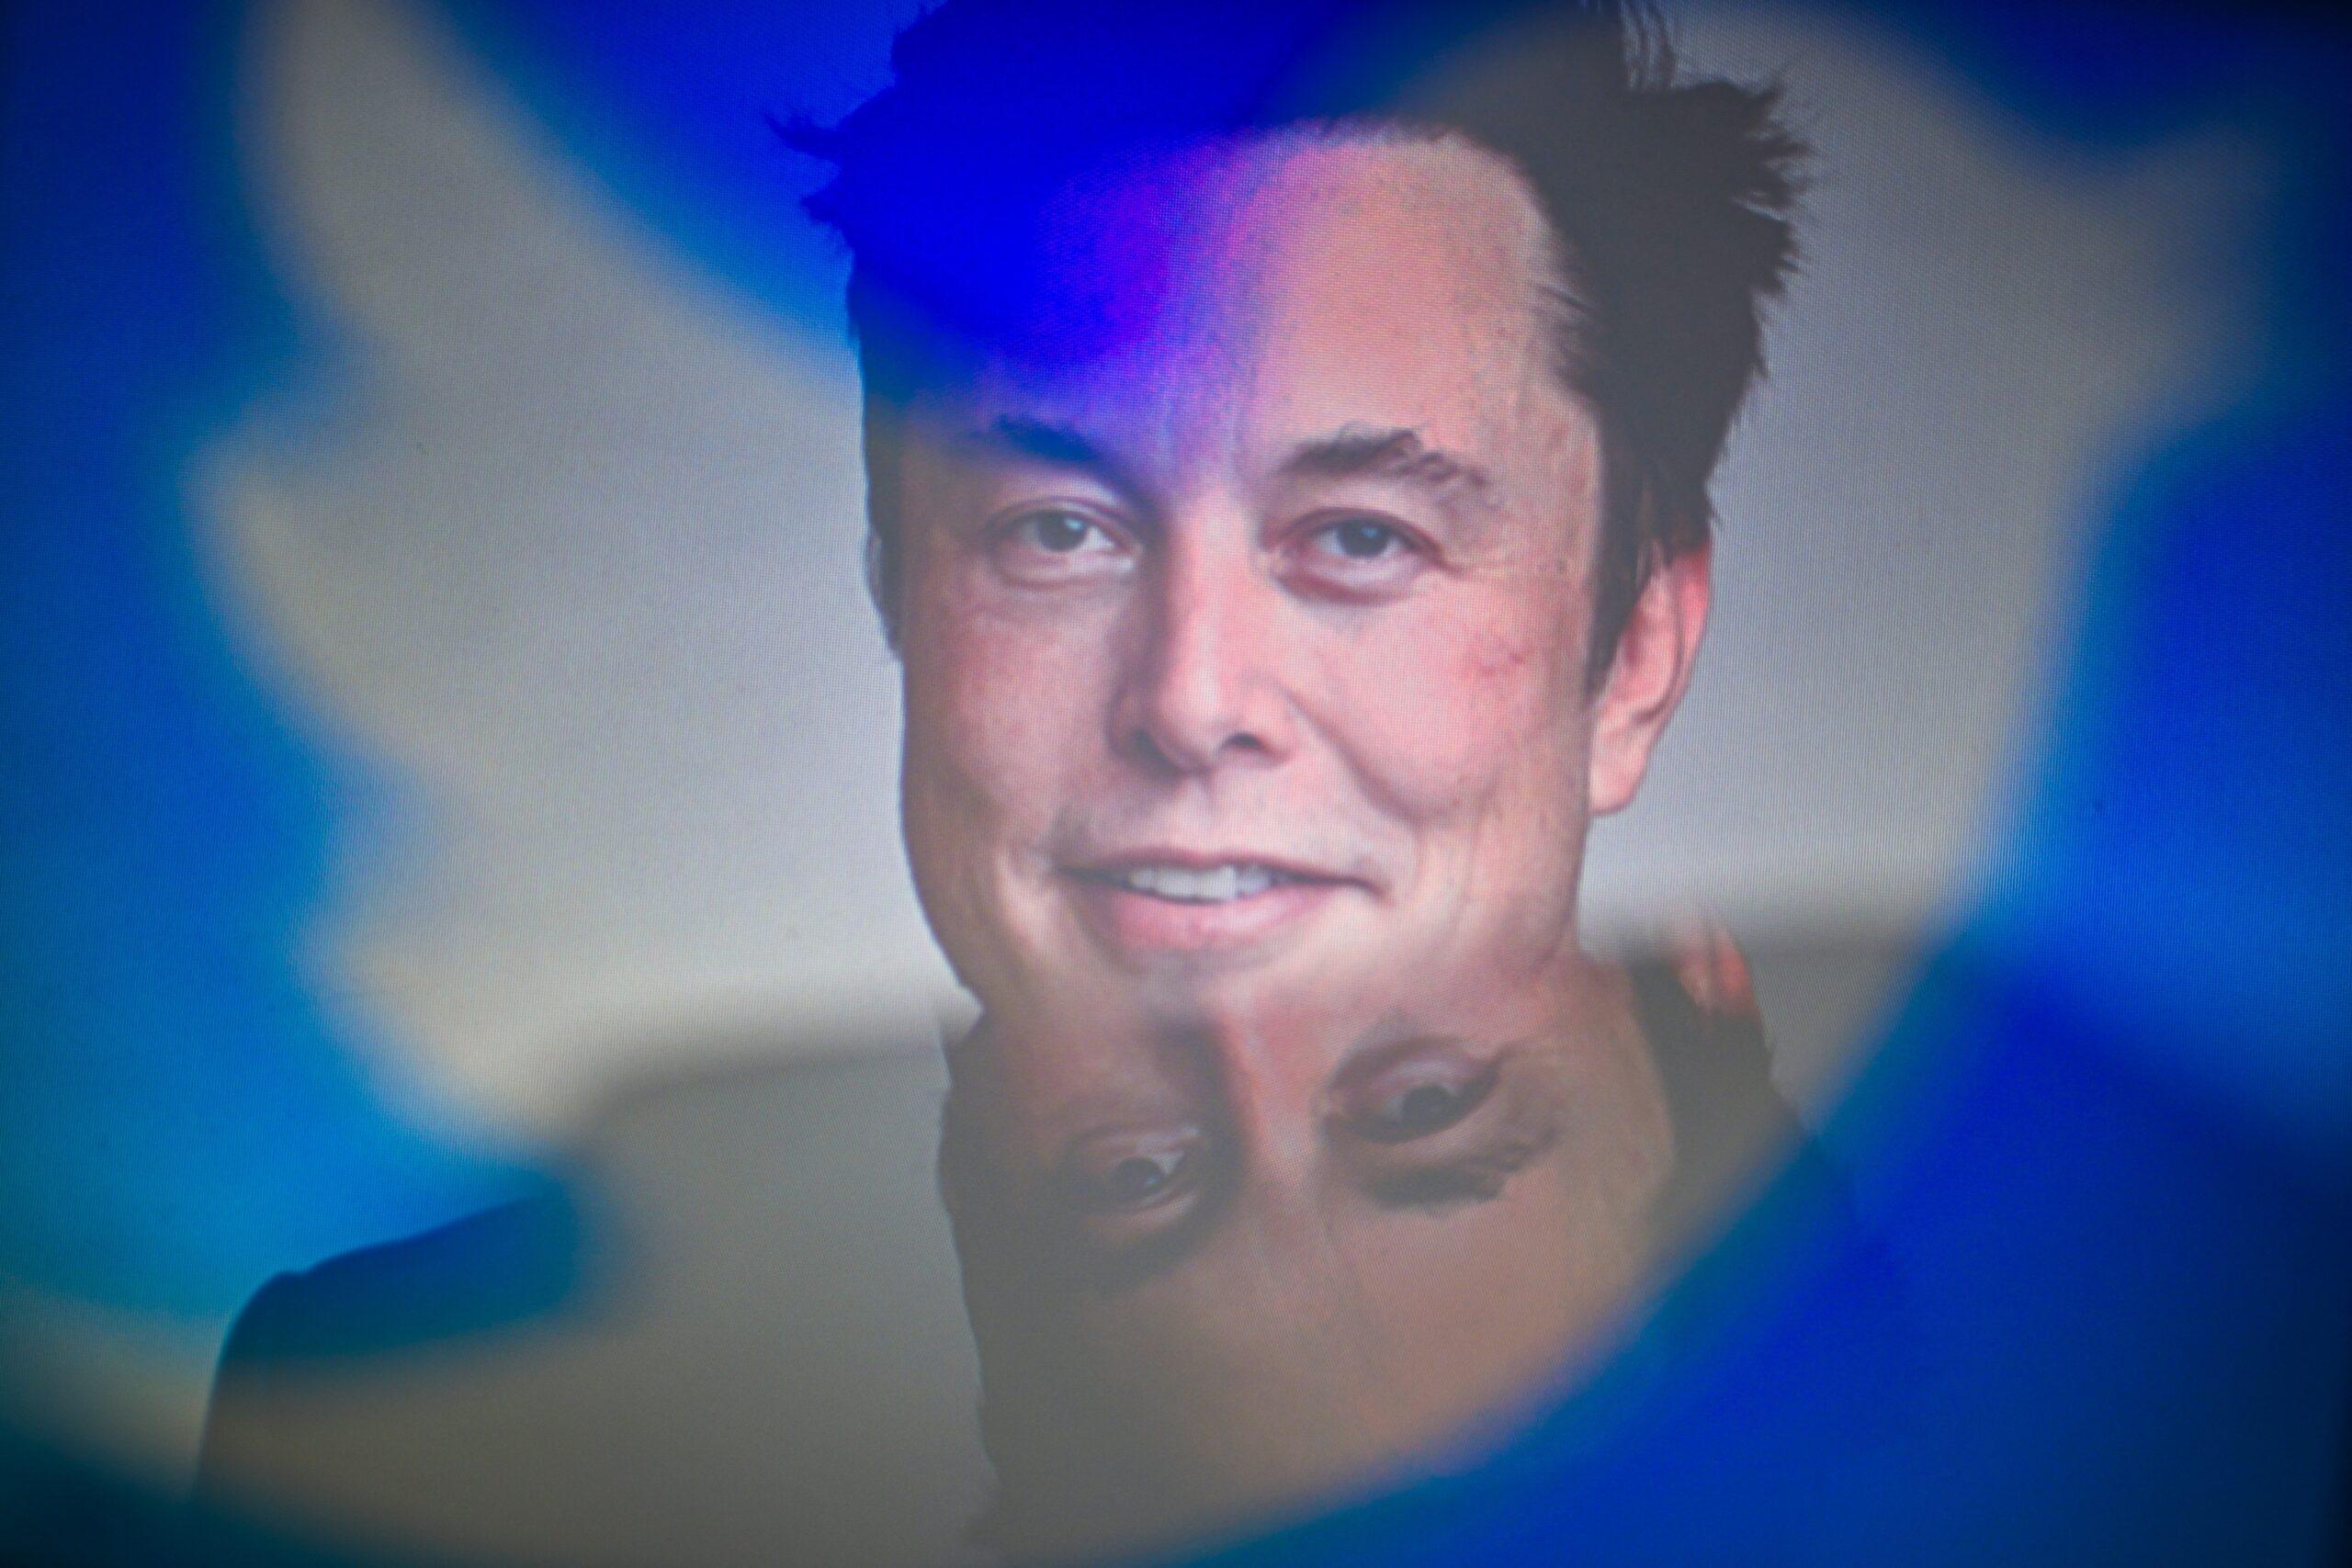 Elon Musk hated on by Twitter for logo change